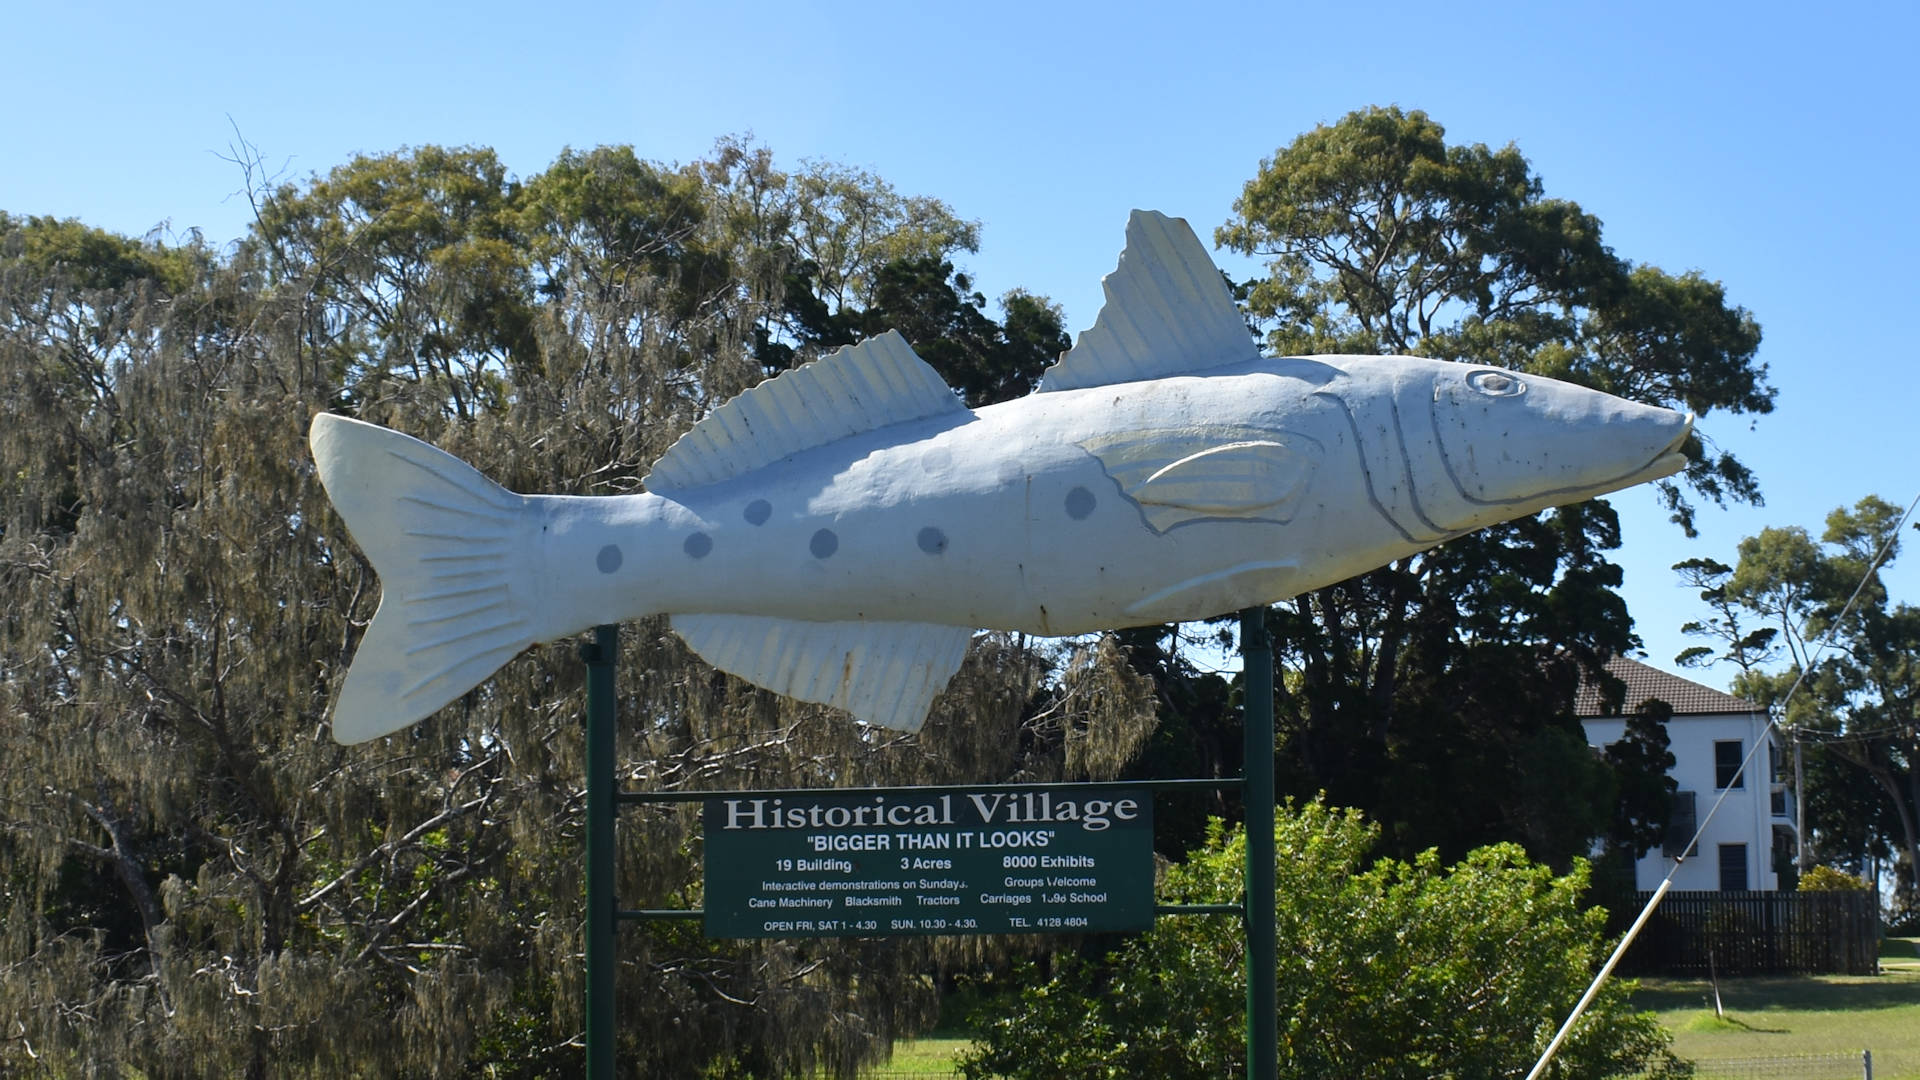 The Big Fighting Whiting outside the Historical Complex in Hervey Bay